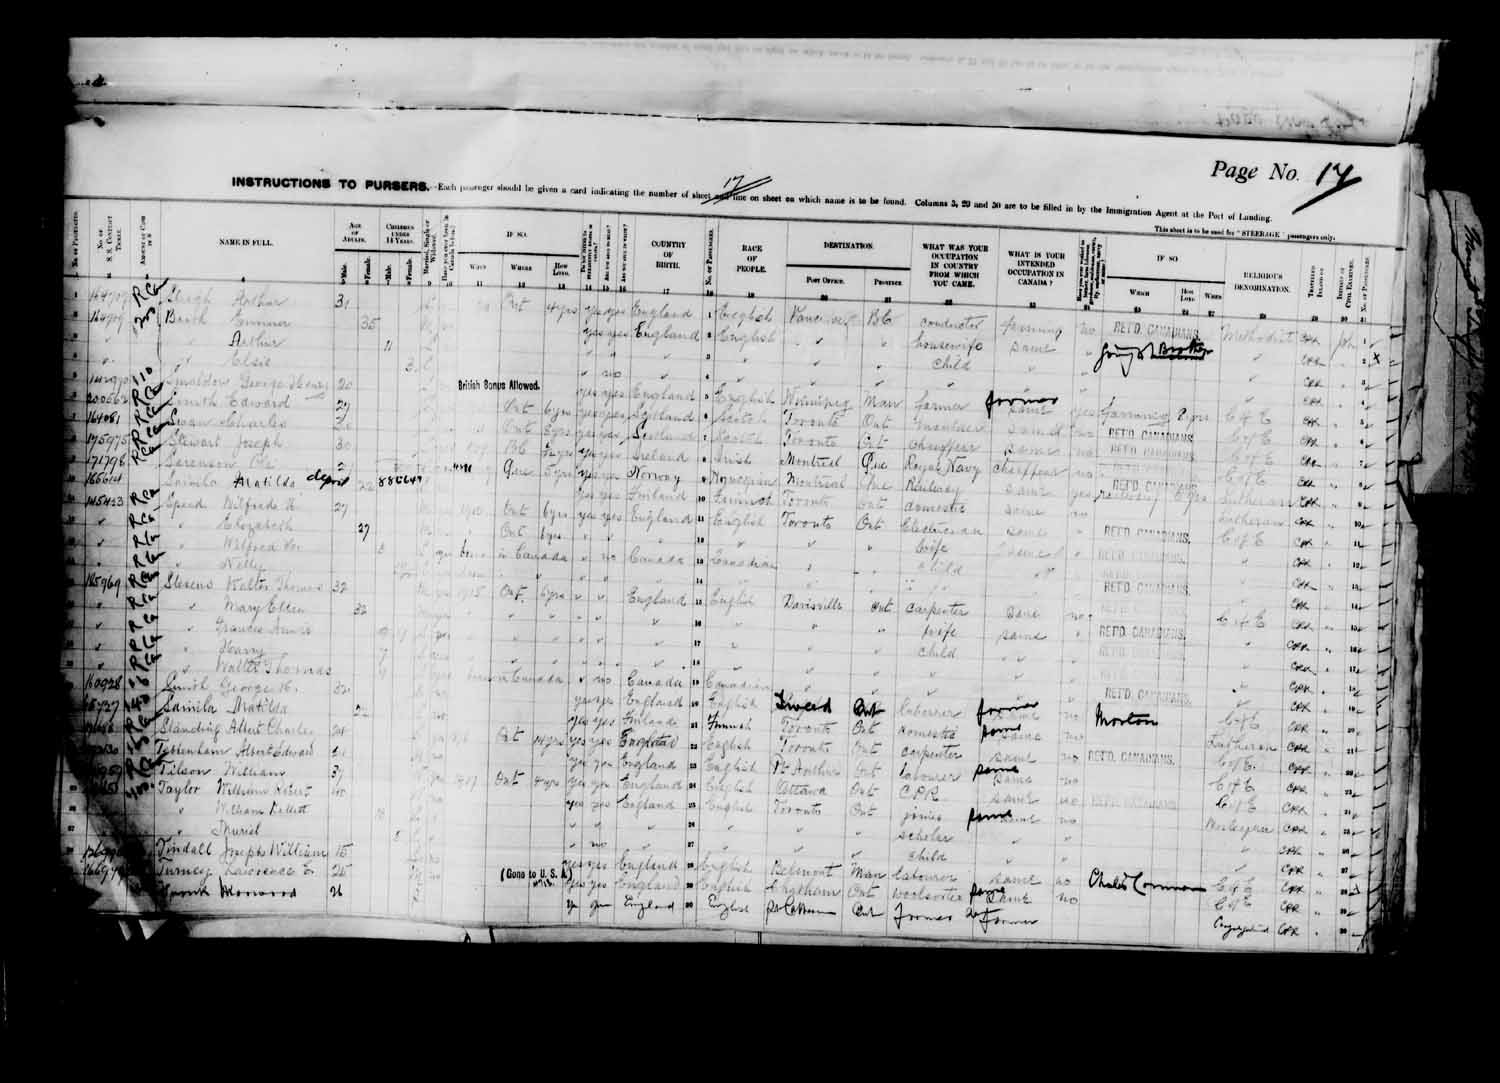 Digitized page of Passenger Lists for Image No.: e003627206